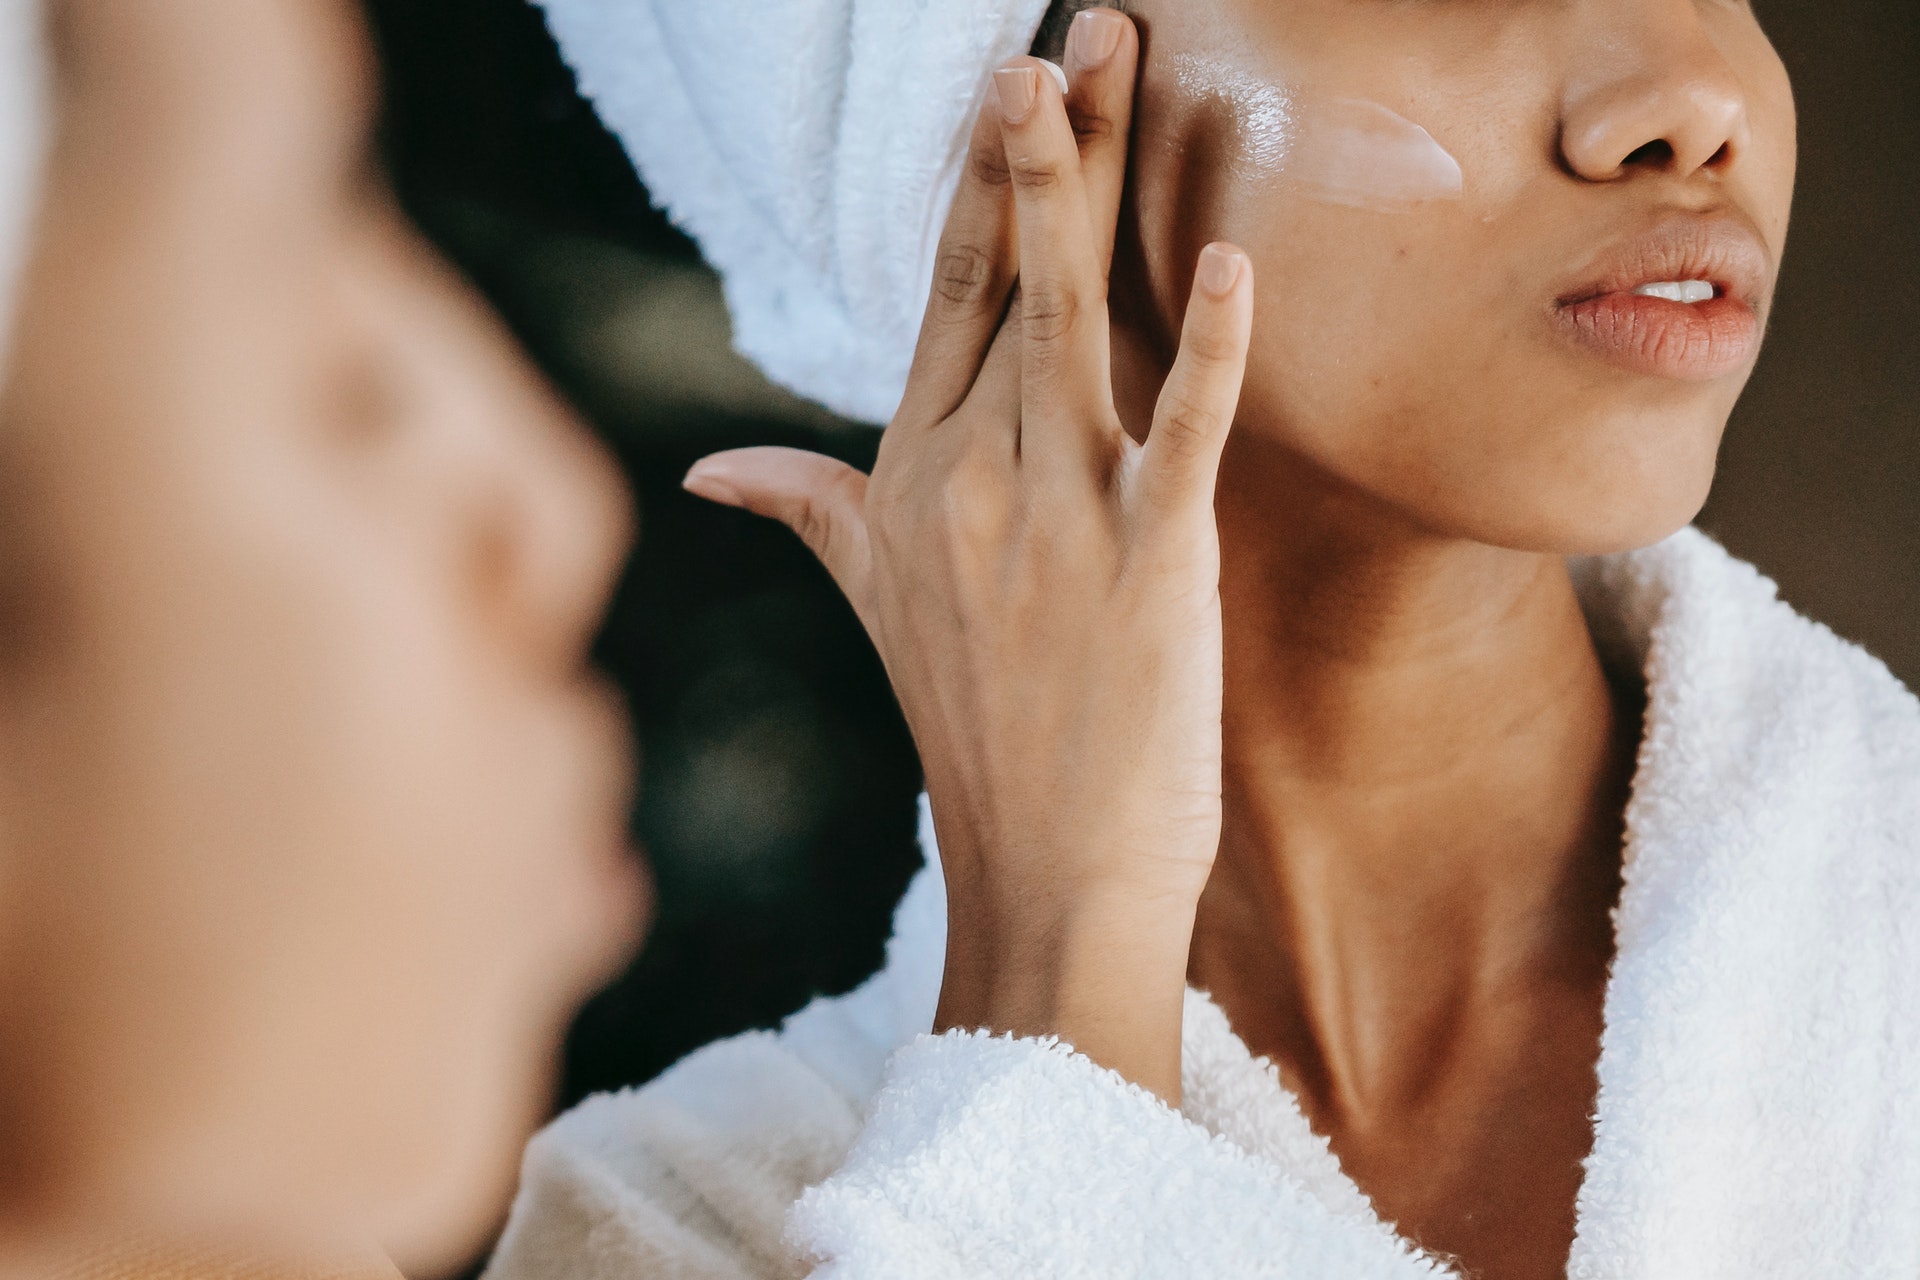 How Often Should You Moisturize Your Face